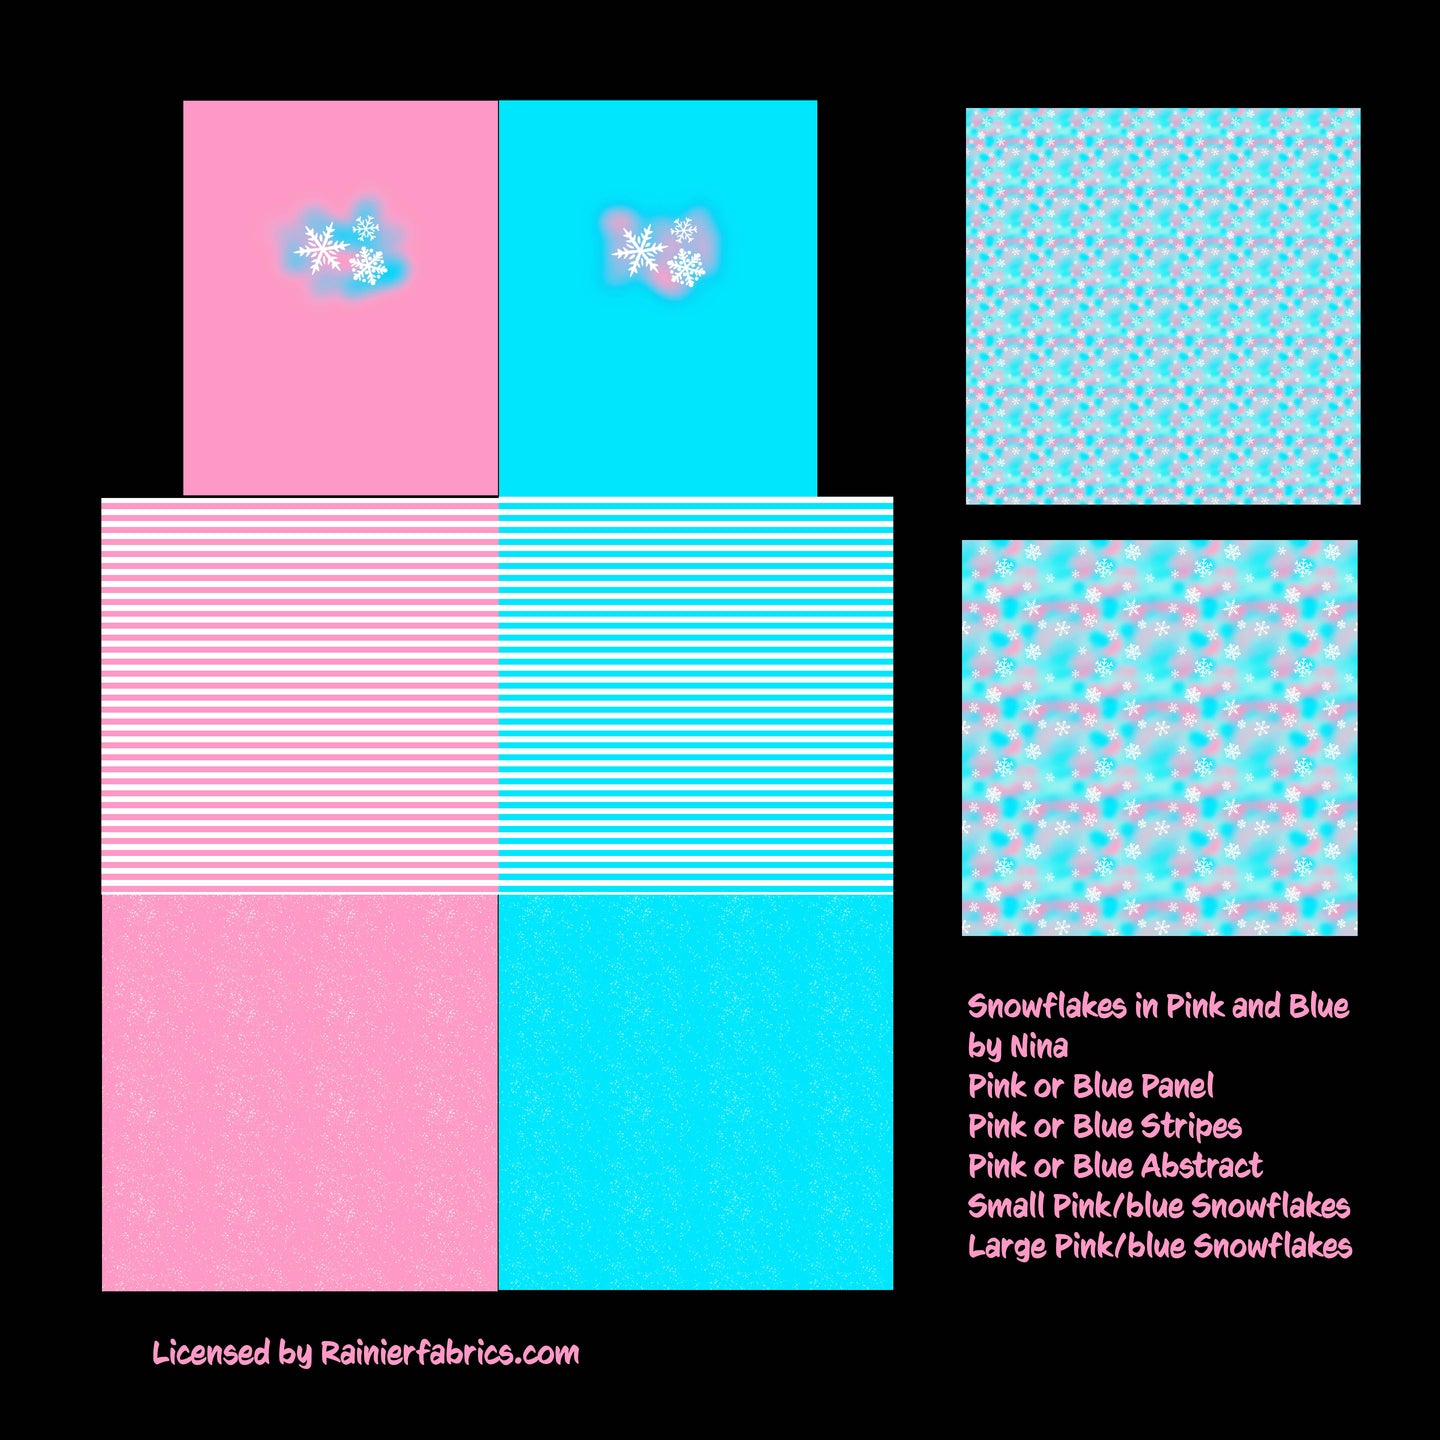 Snowflakes in Pink and Blue - from Nina  - 2-5 day turnaround - Order by 1/2 yard; Description of bases below